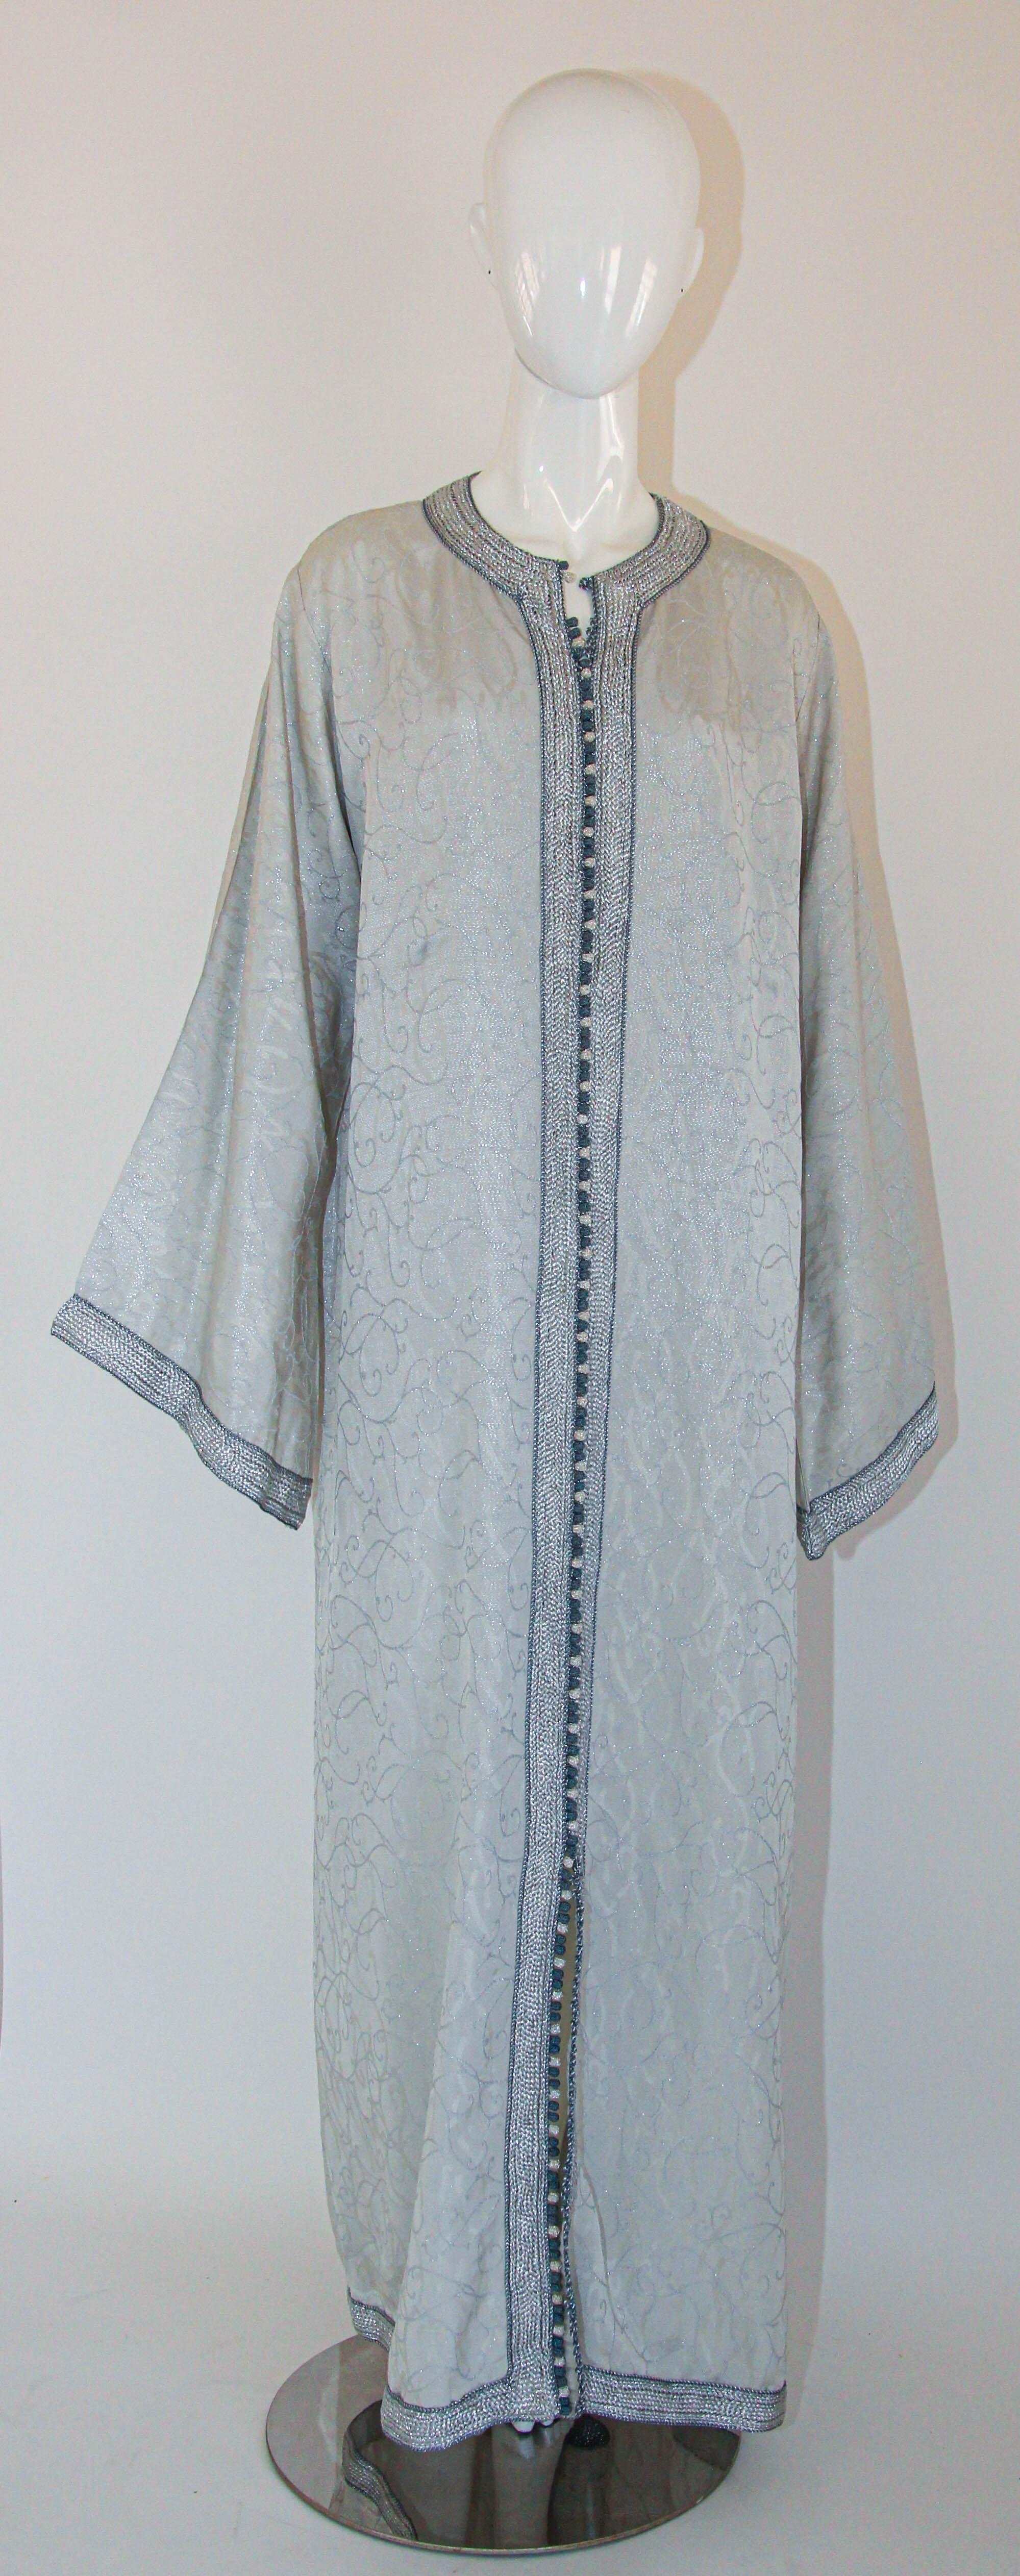 1970s Moroccan Vintage Caftan Maxi Dress Kaftan Light  Florentine Silver Color.
1970s Moroccan vintage caftan is a timeless and captivating piece of clothing that embodies the essence of Moroccan culture and style from that era.
This stunning caftan